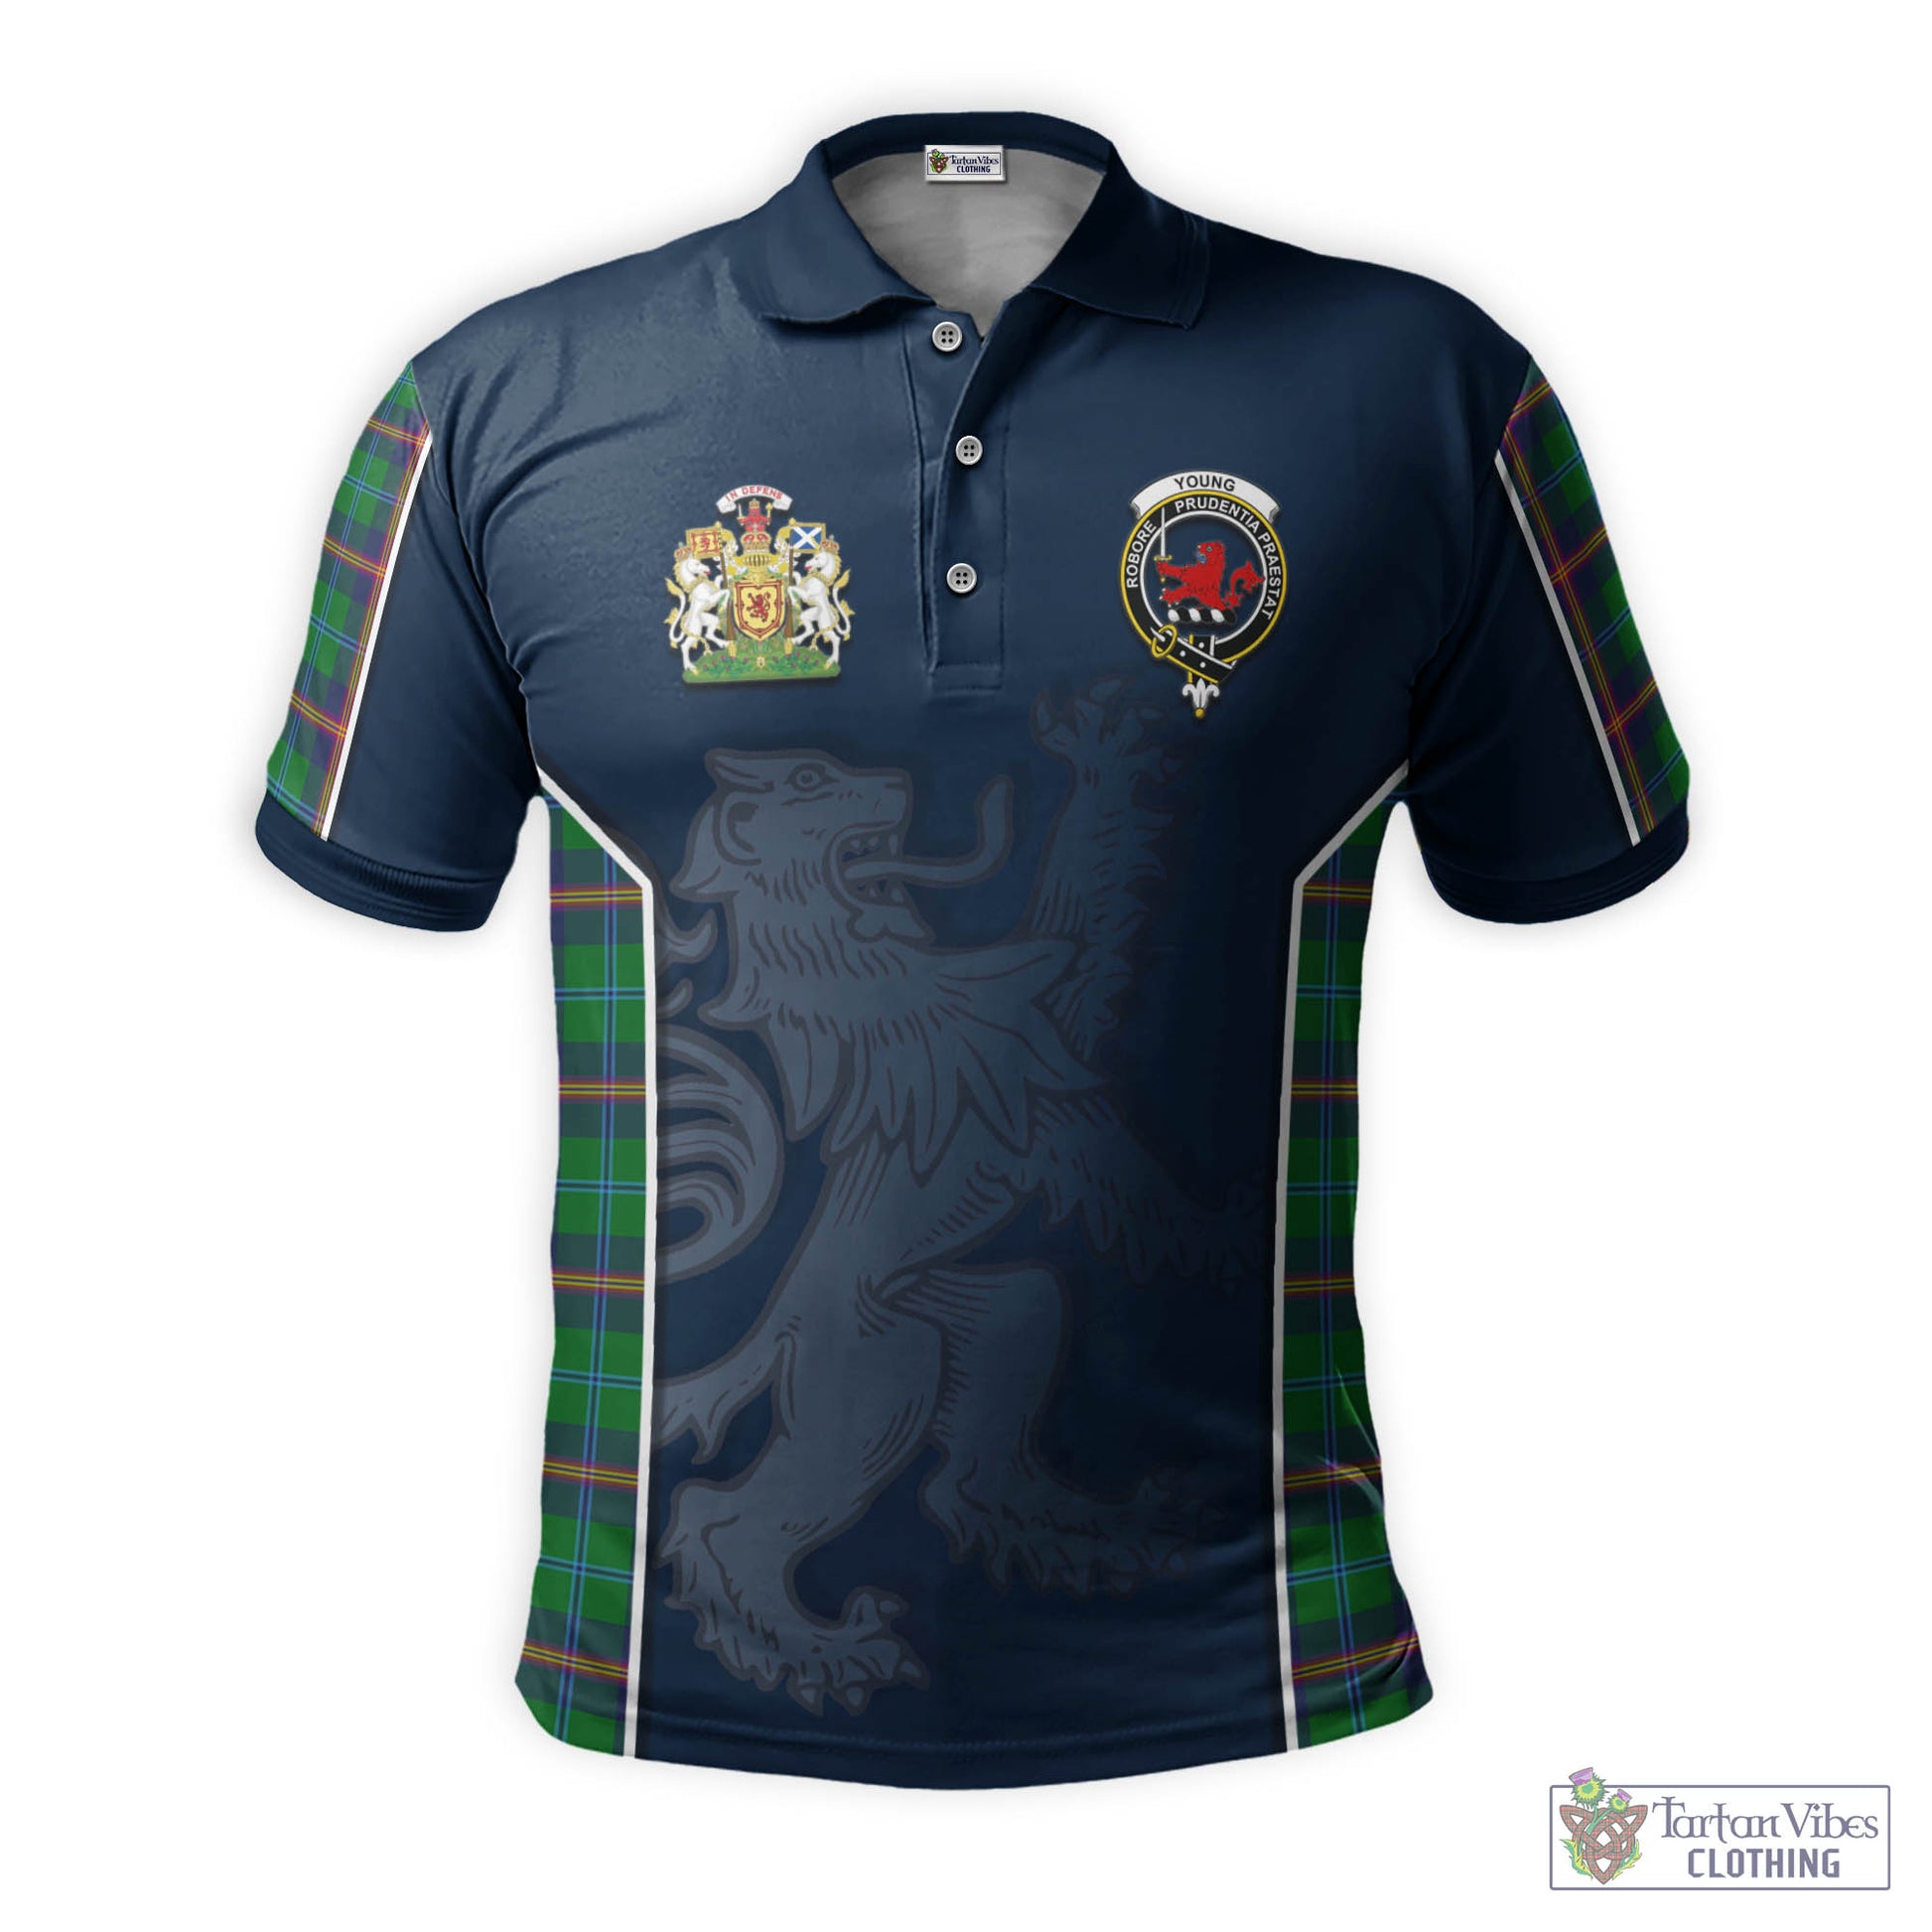 Tartan Vibes Clothing Young Modern Tartan Men's Polo Shirt with Family Crest and Lion Rampant Vibes Sport Style